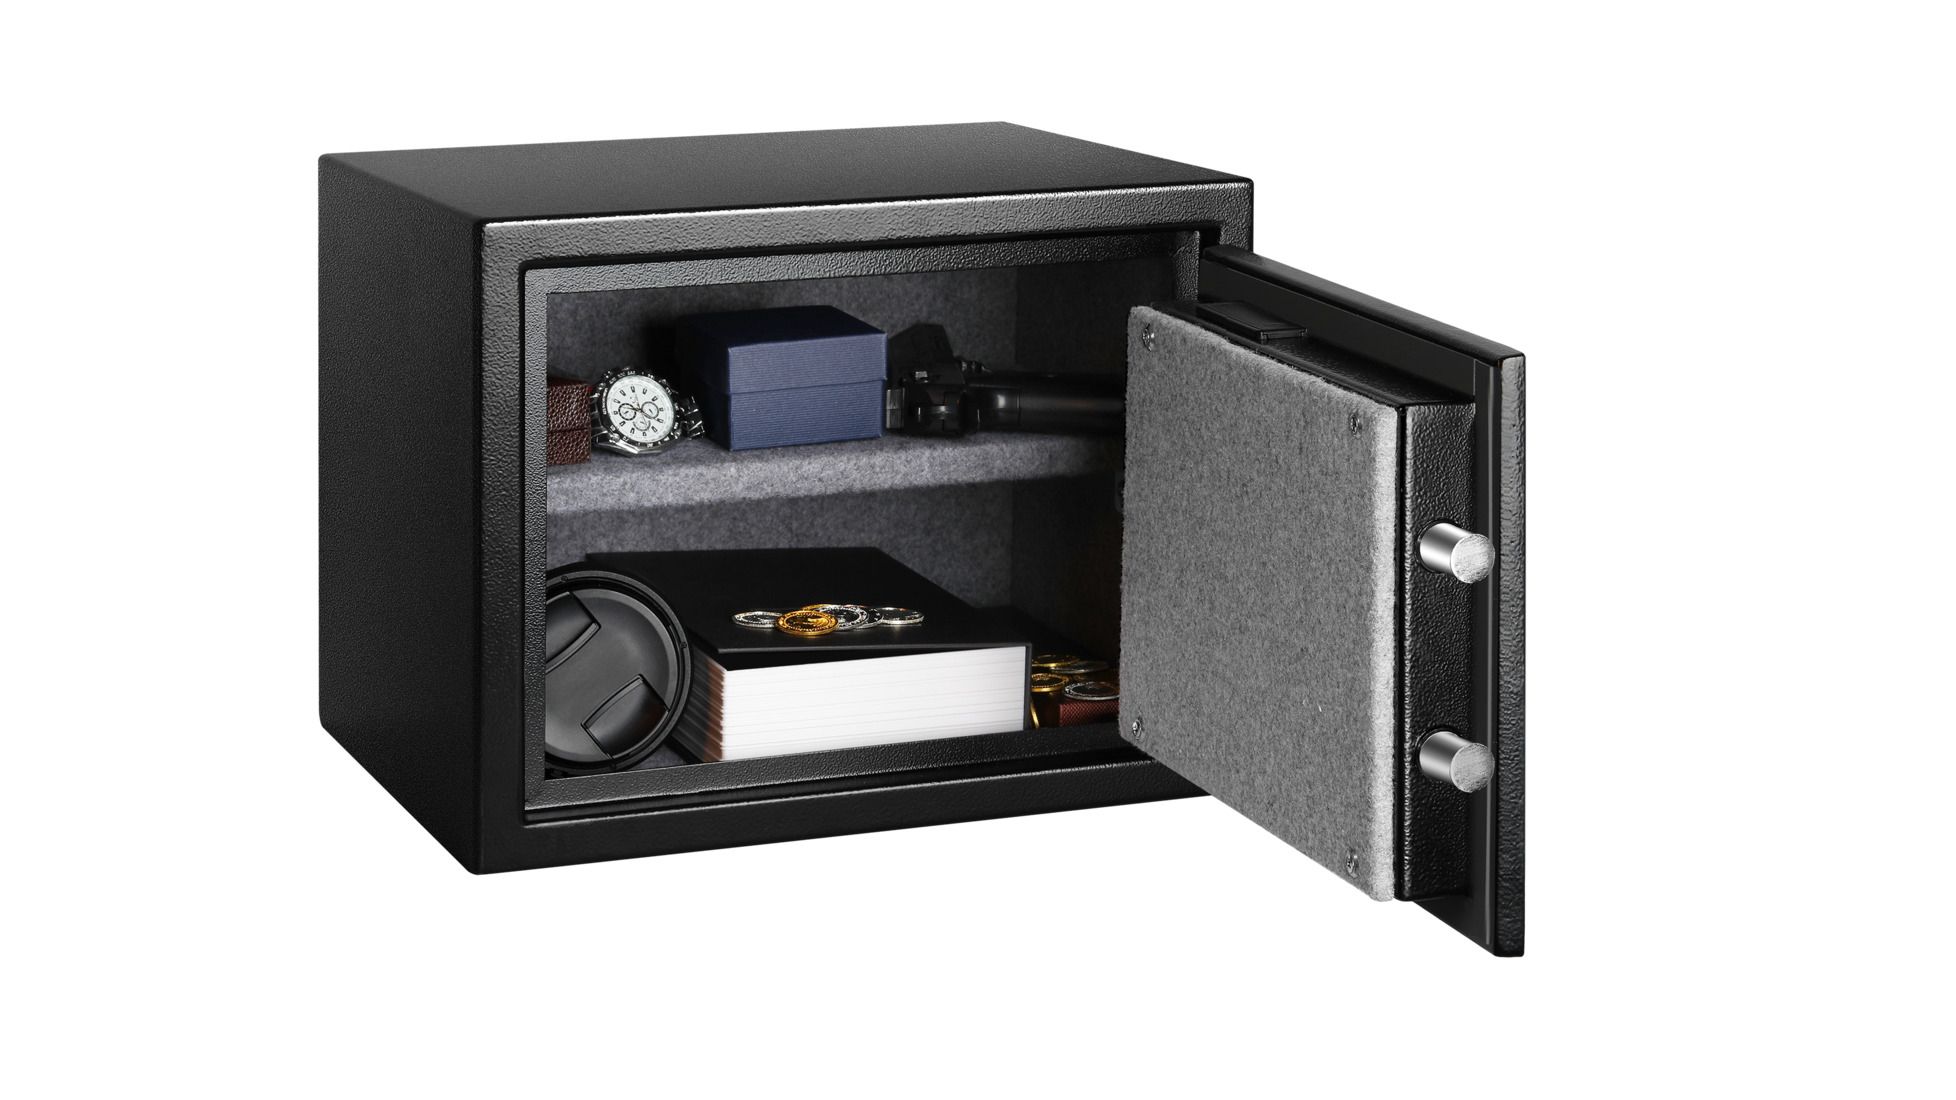 Fortress Small Fireproof Safe 44EF10 | $10.00 Off